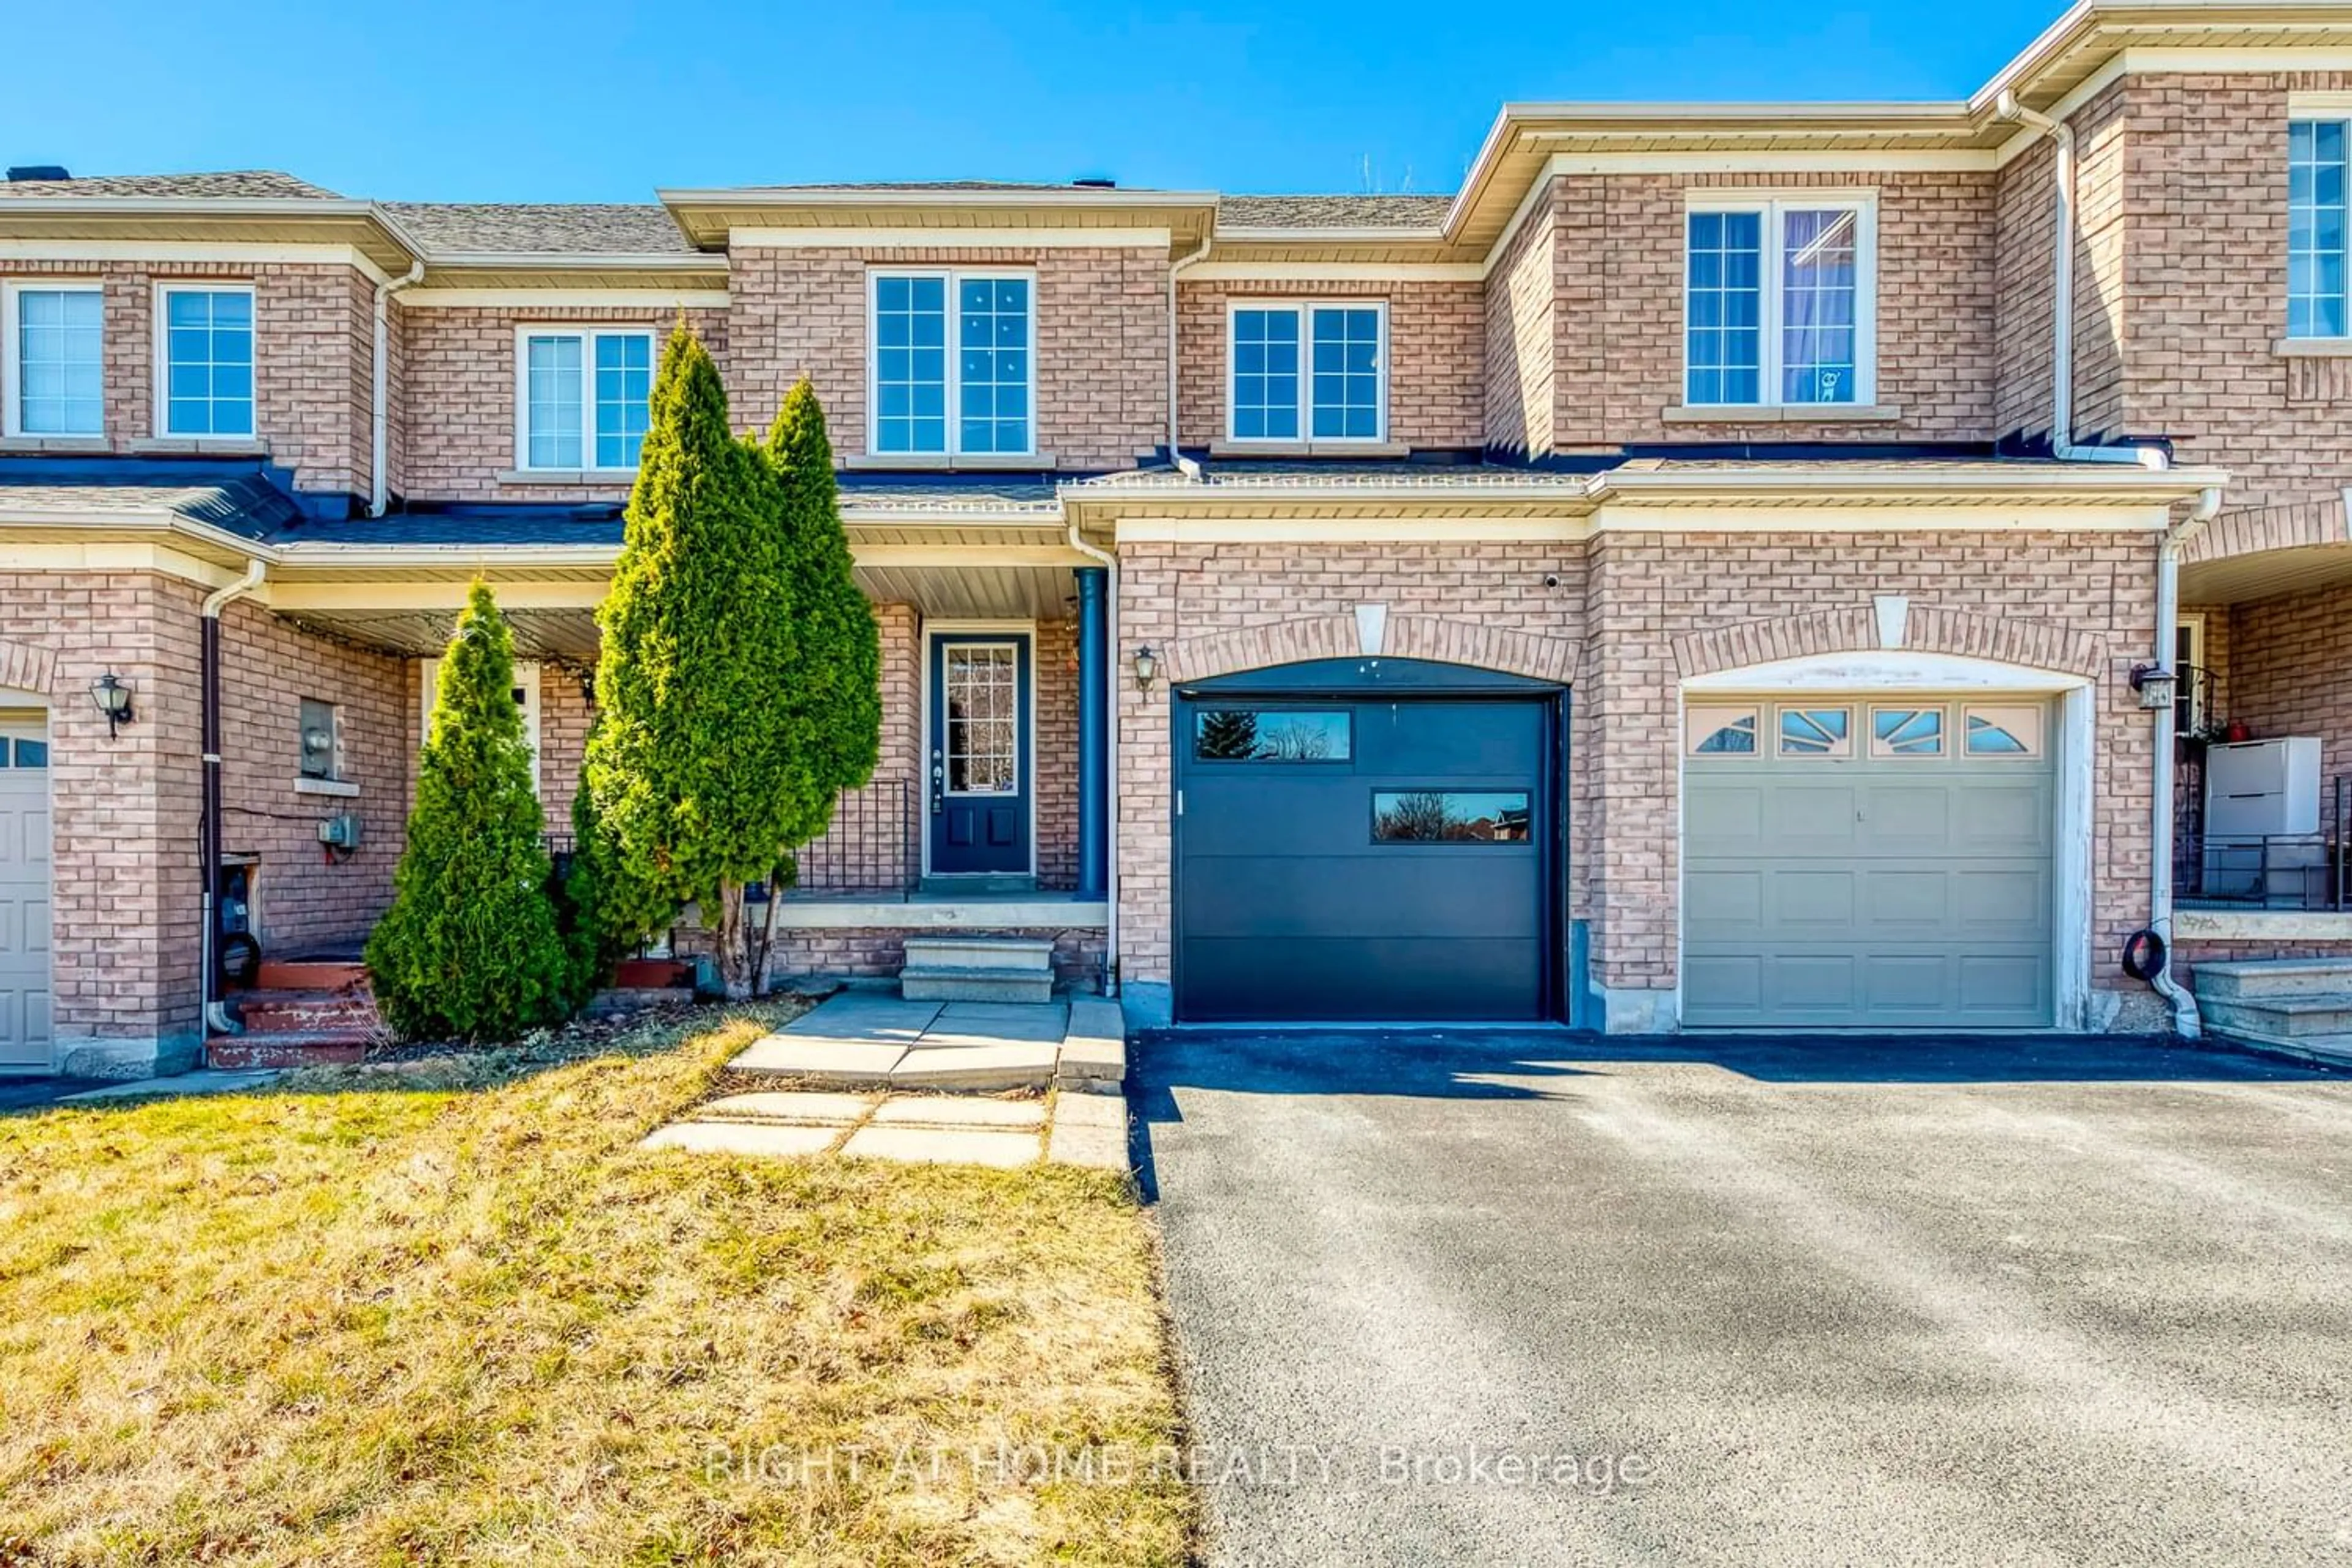 Home with brick exterior material for 26 Oglevie Dr, Whitby Ontario L1R 2Y4